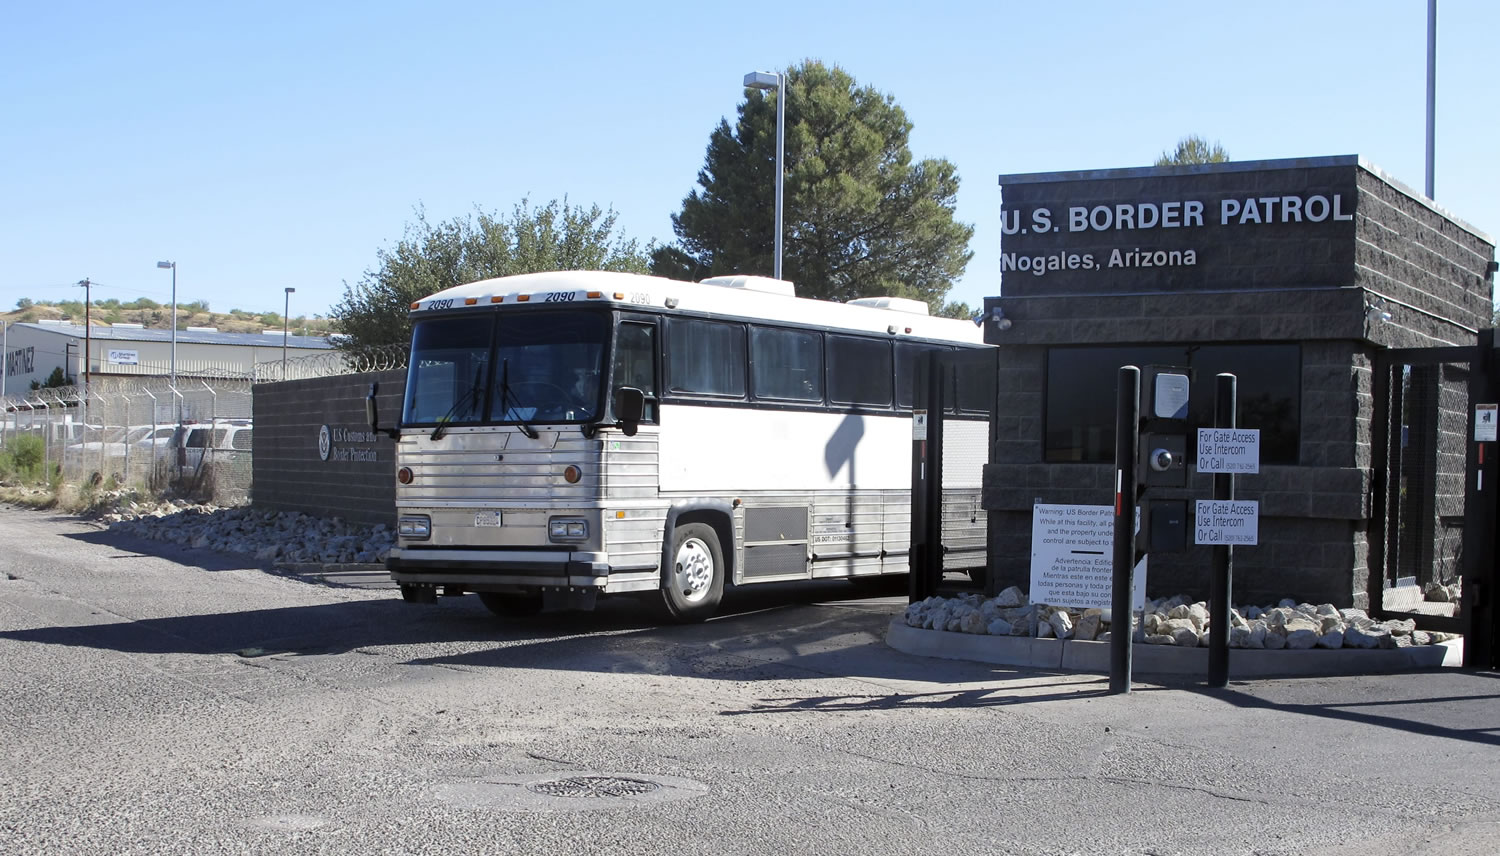 A bus leaves the entrance of the U. S. Border Patrol facility on Saturday in Nogales, Ariz.